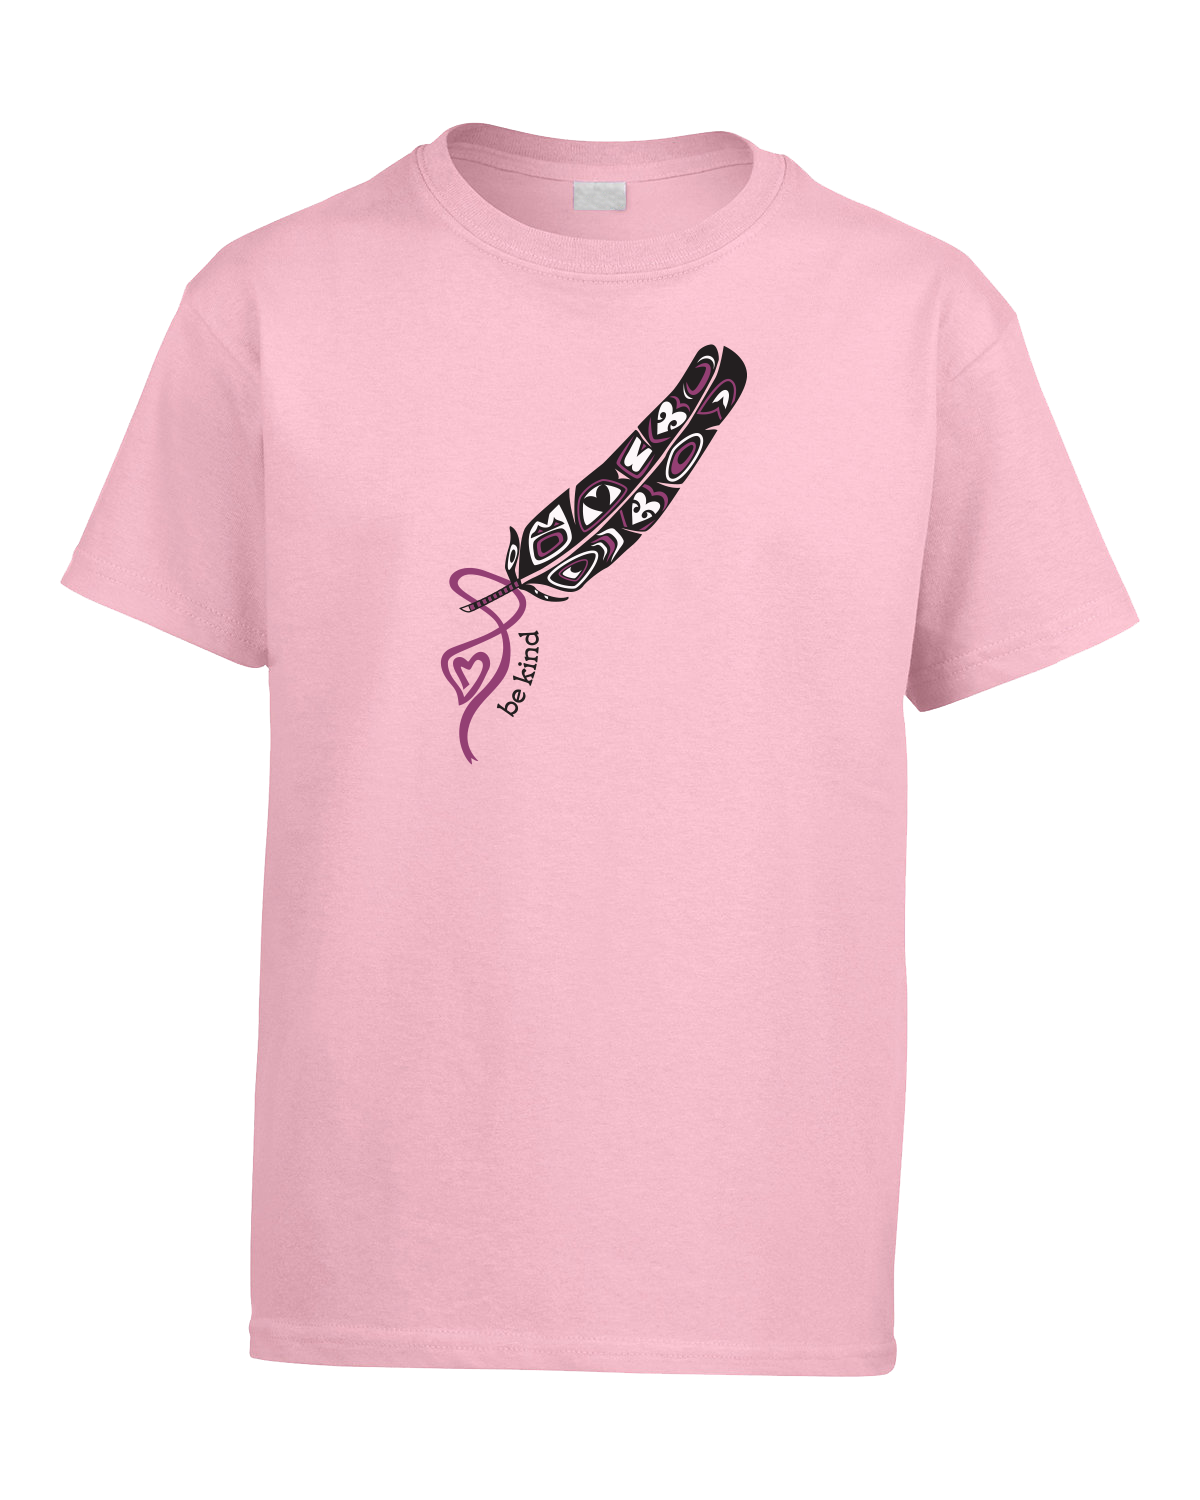 Sacred Feather - Adult Pink T-Shirt